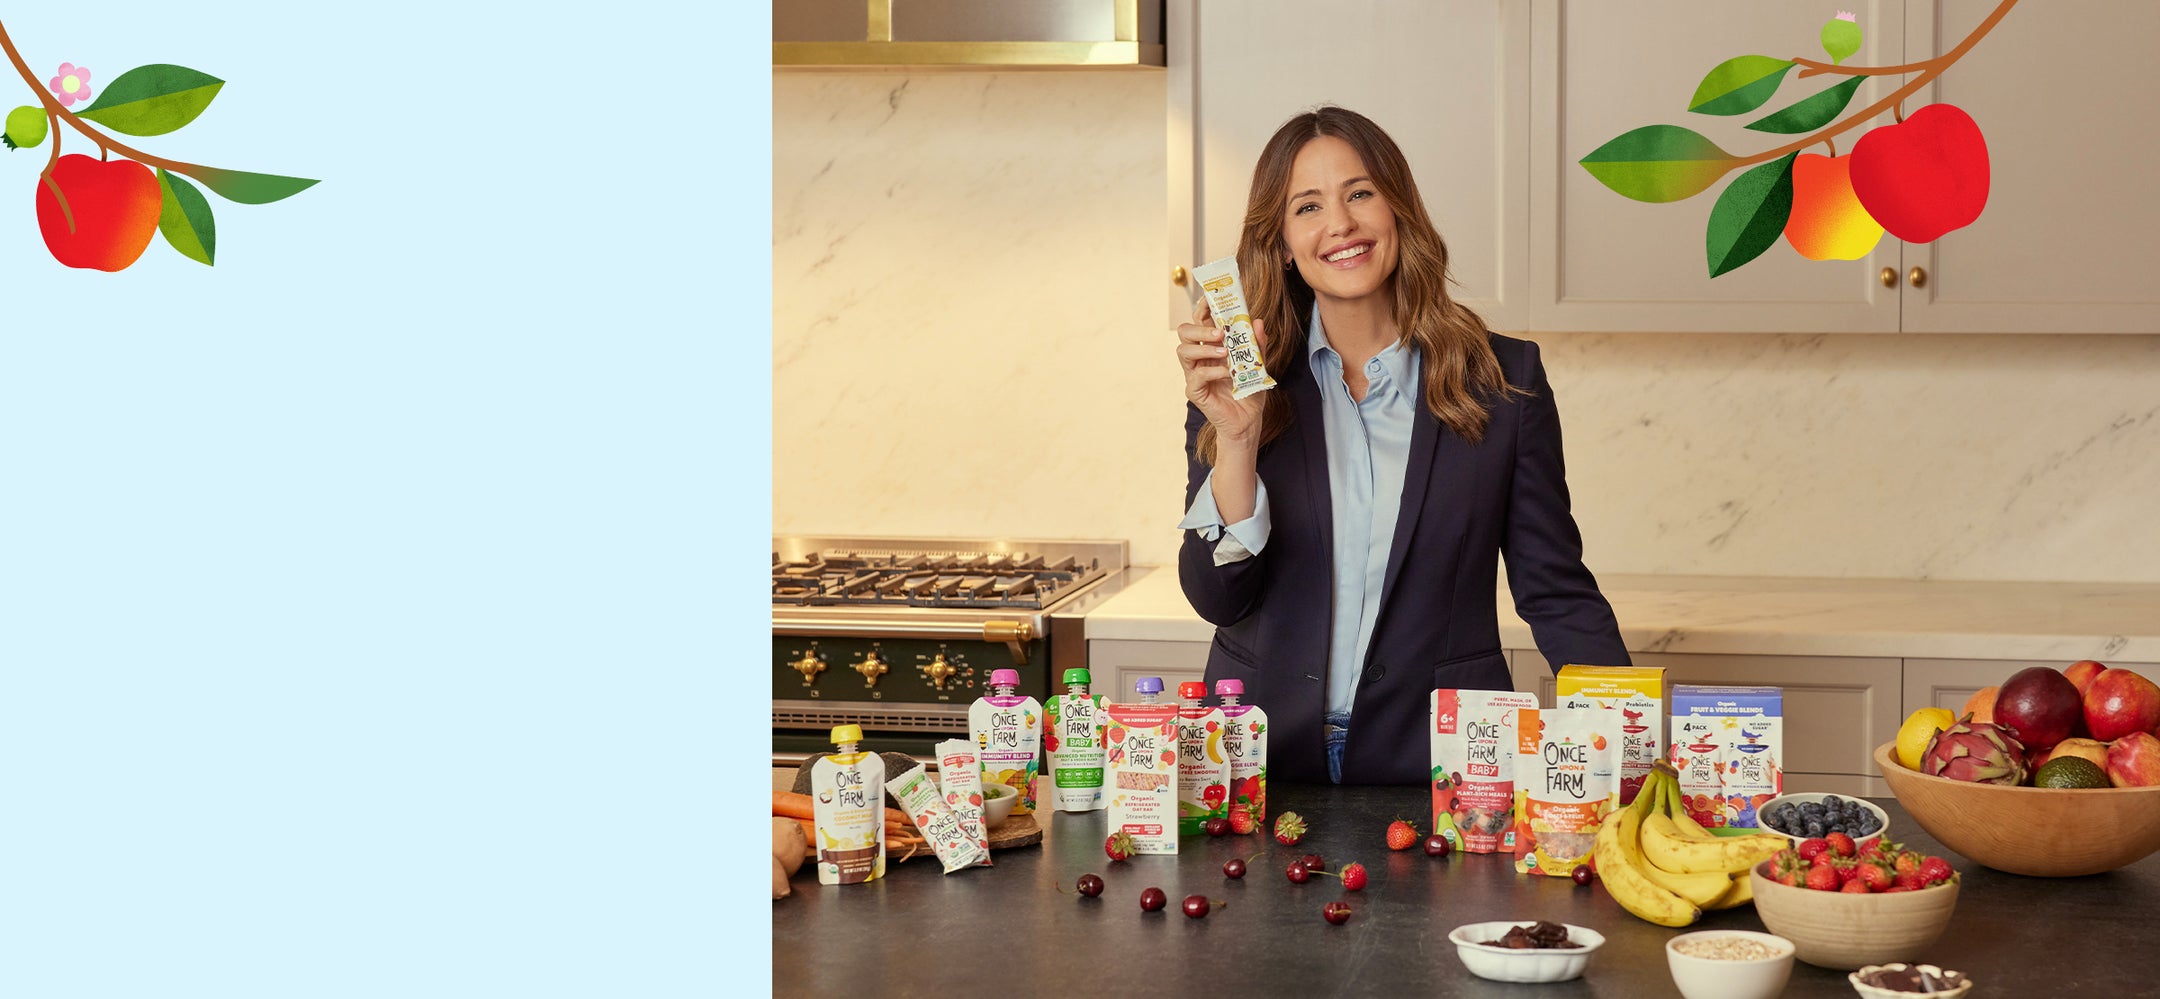 Once Upon a Farm Co-Founder Jennifer Garner poses with all Once Upon a Farm products including the new Refrigerated Oat Bar